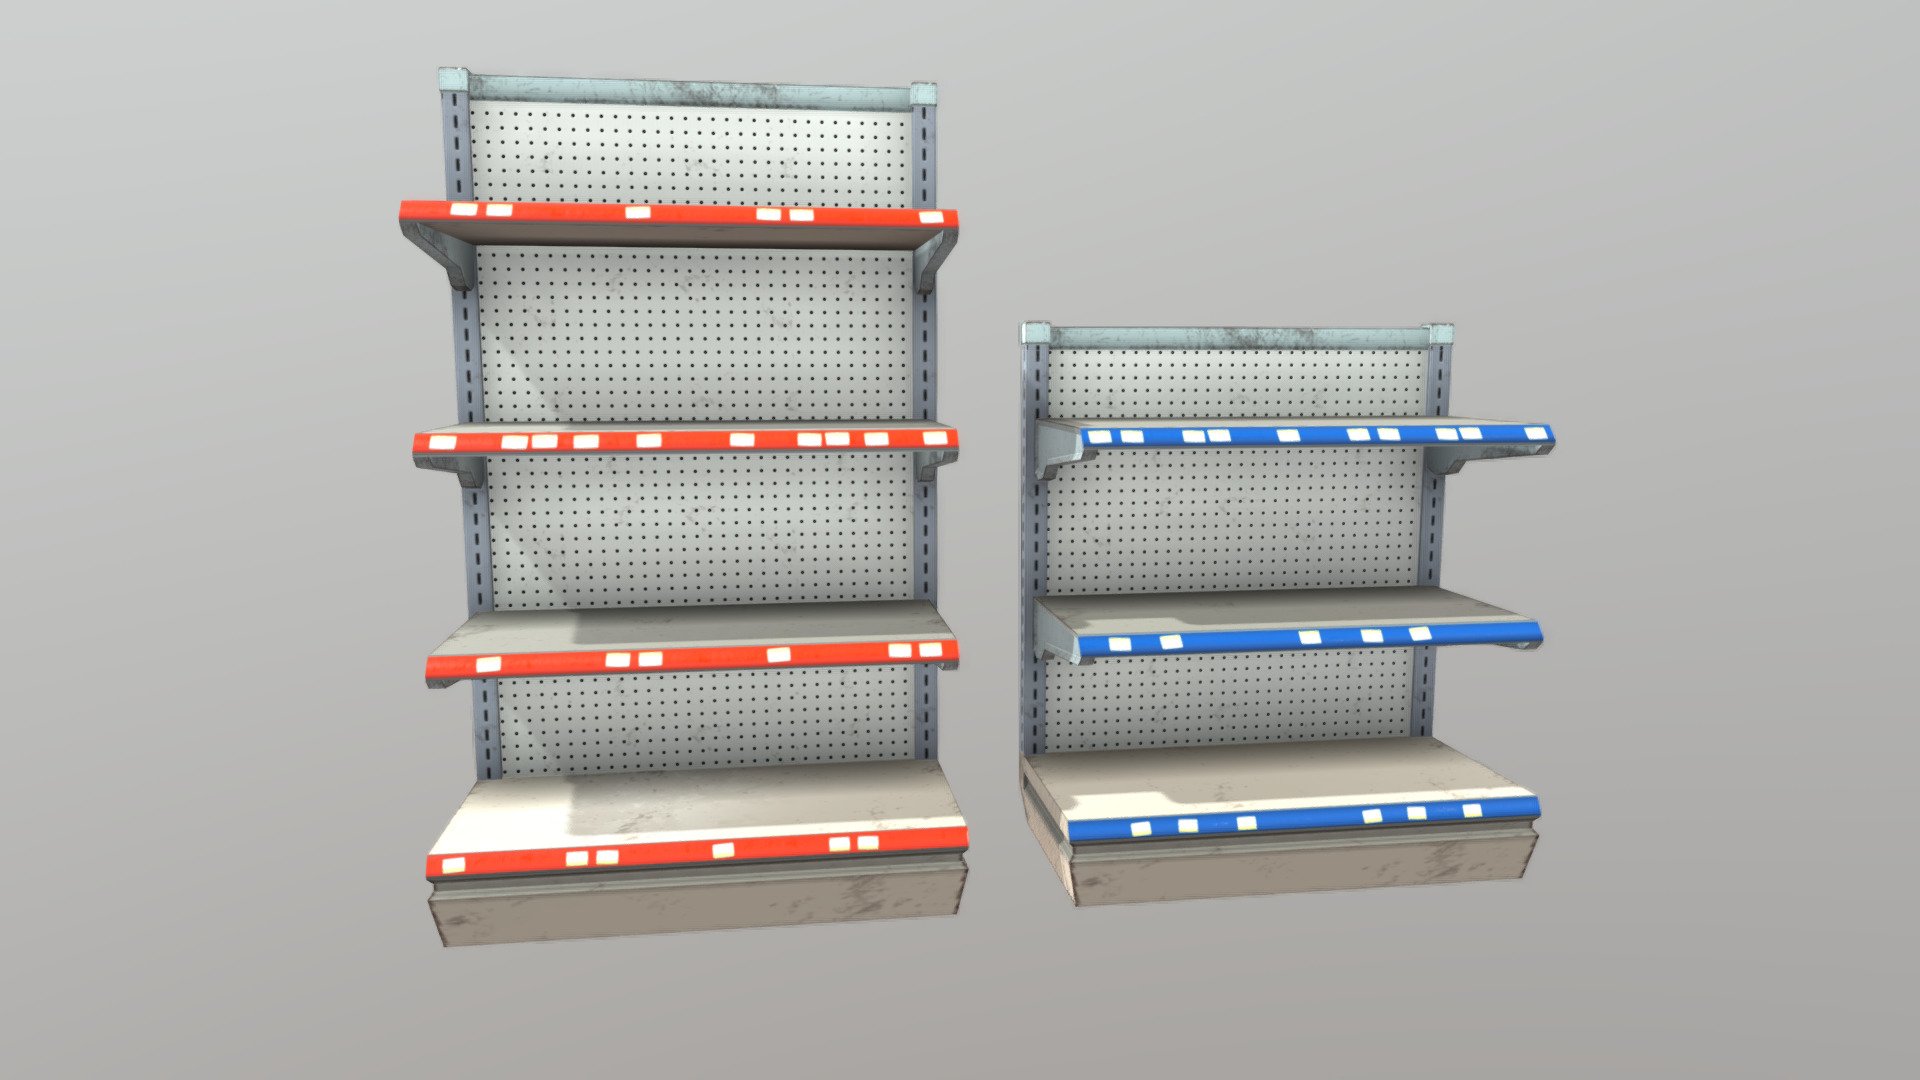 Modular store shelves made for Dystopia - After Civilization

Mesh made using 3ds max and materials made using Substance Designer 3d model